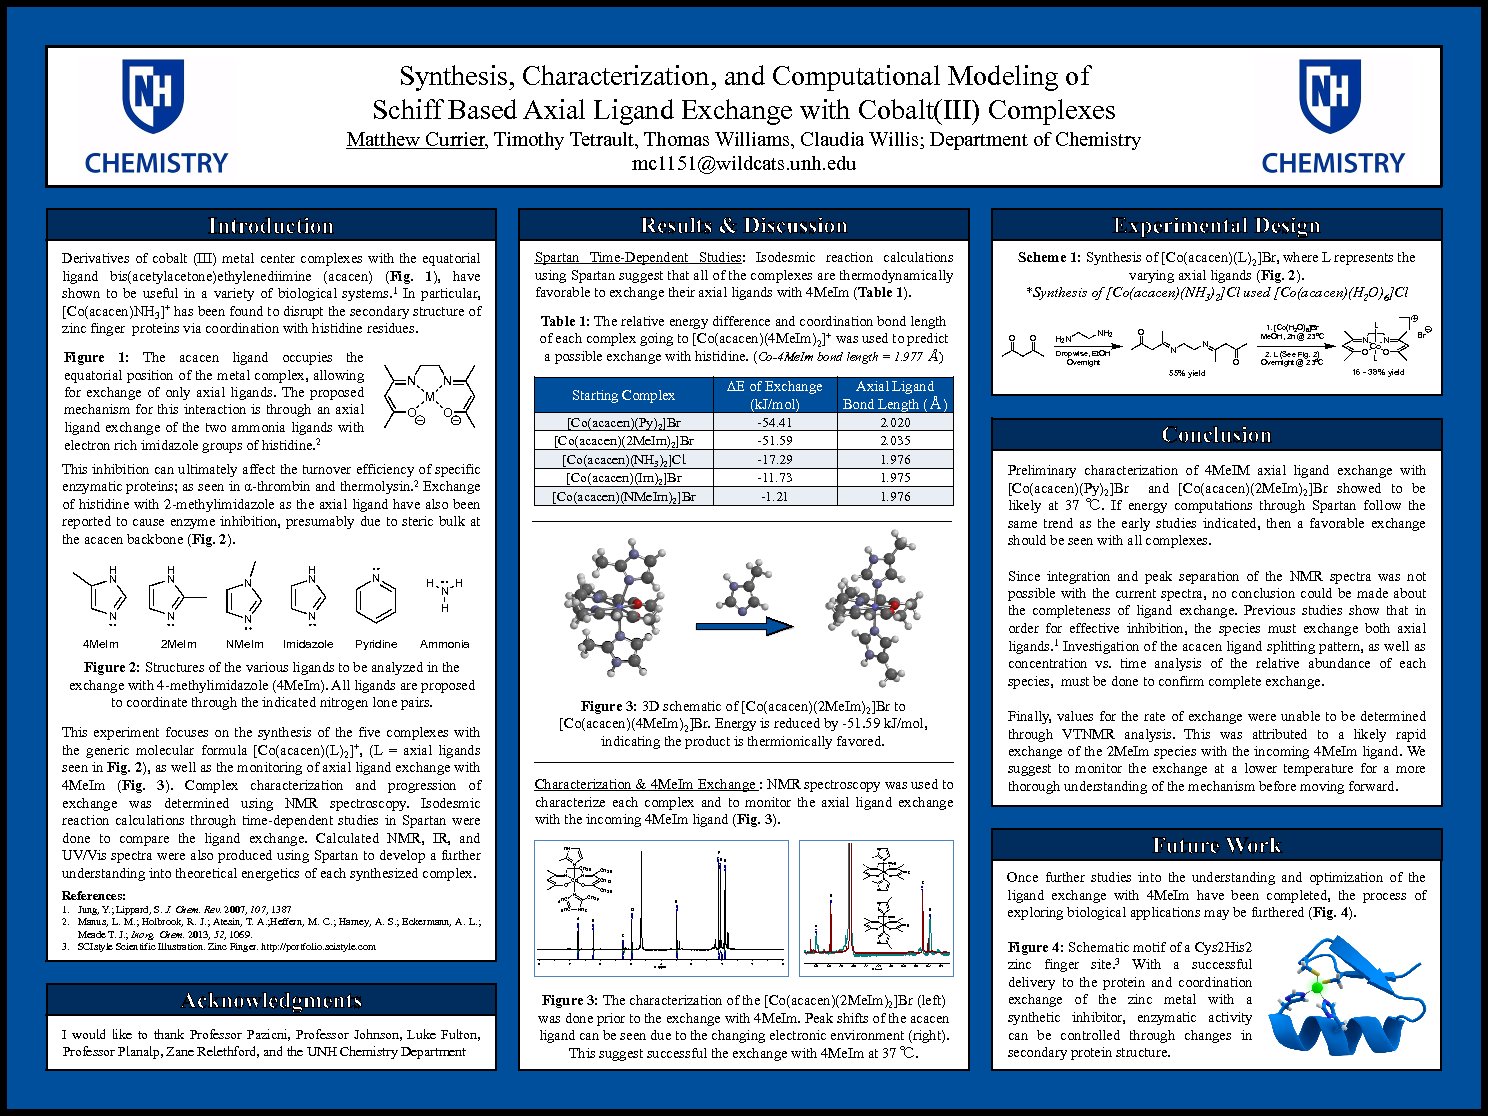 Synthesis, Characterization, And Computational Modeling Of  Shiff-Based Axial Ligand Exchange With Cobalt(Iii) Complexes by mc1151